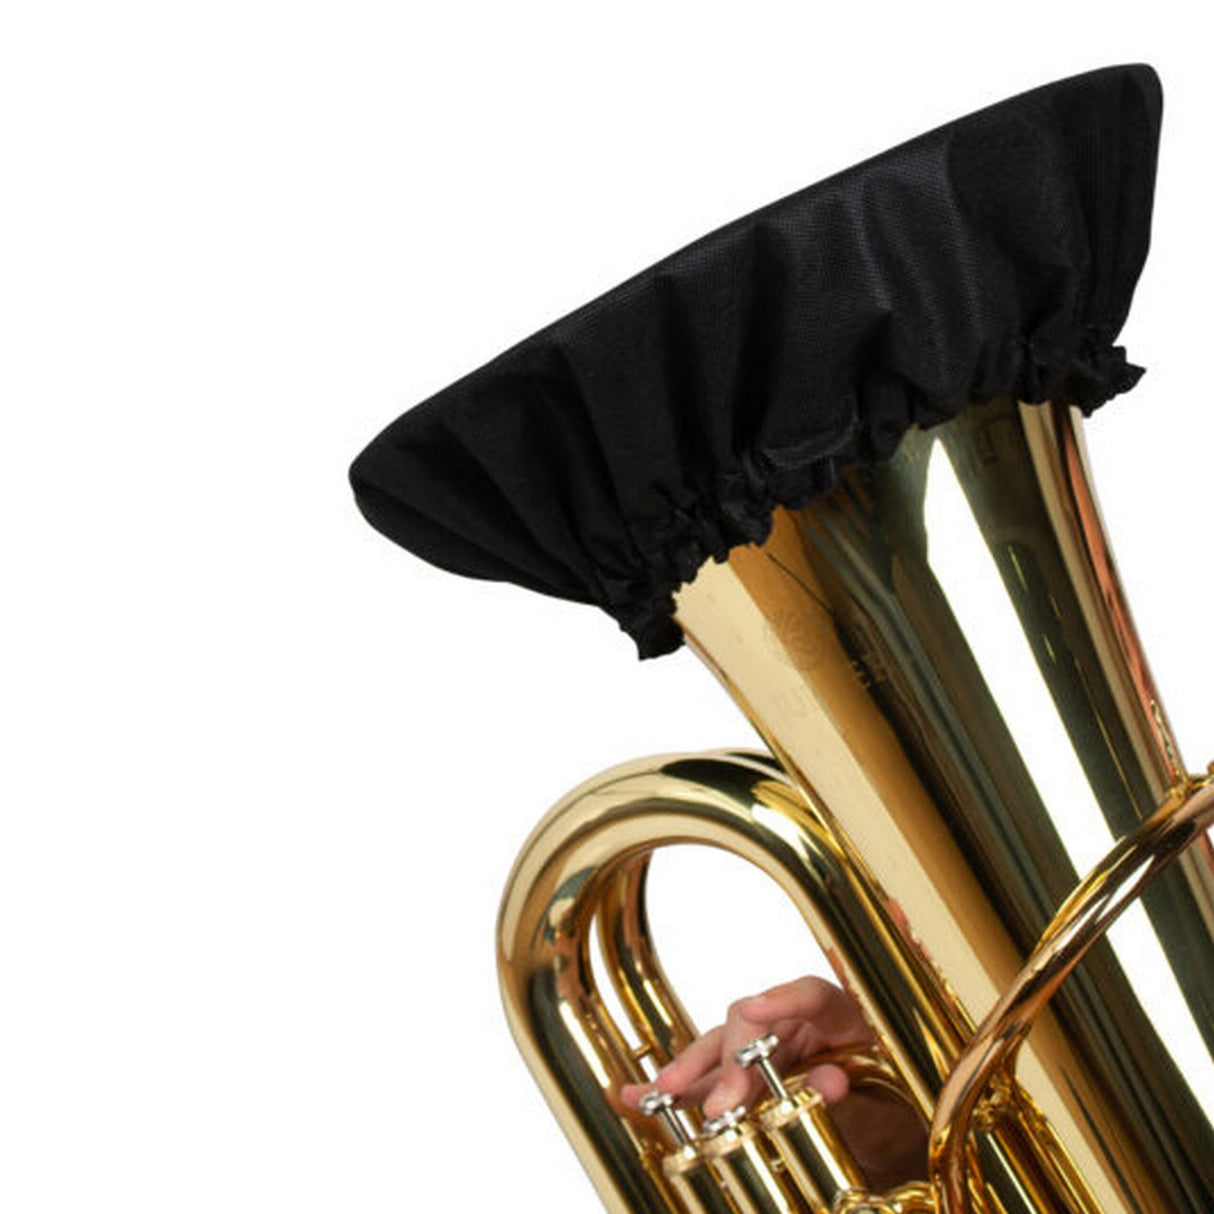 Gator GBELLCVR1011BK Wind Instrument Double-Layer Cover for Bell Sizes Ranging from 10 to 11-Inches, Black Color